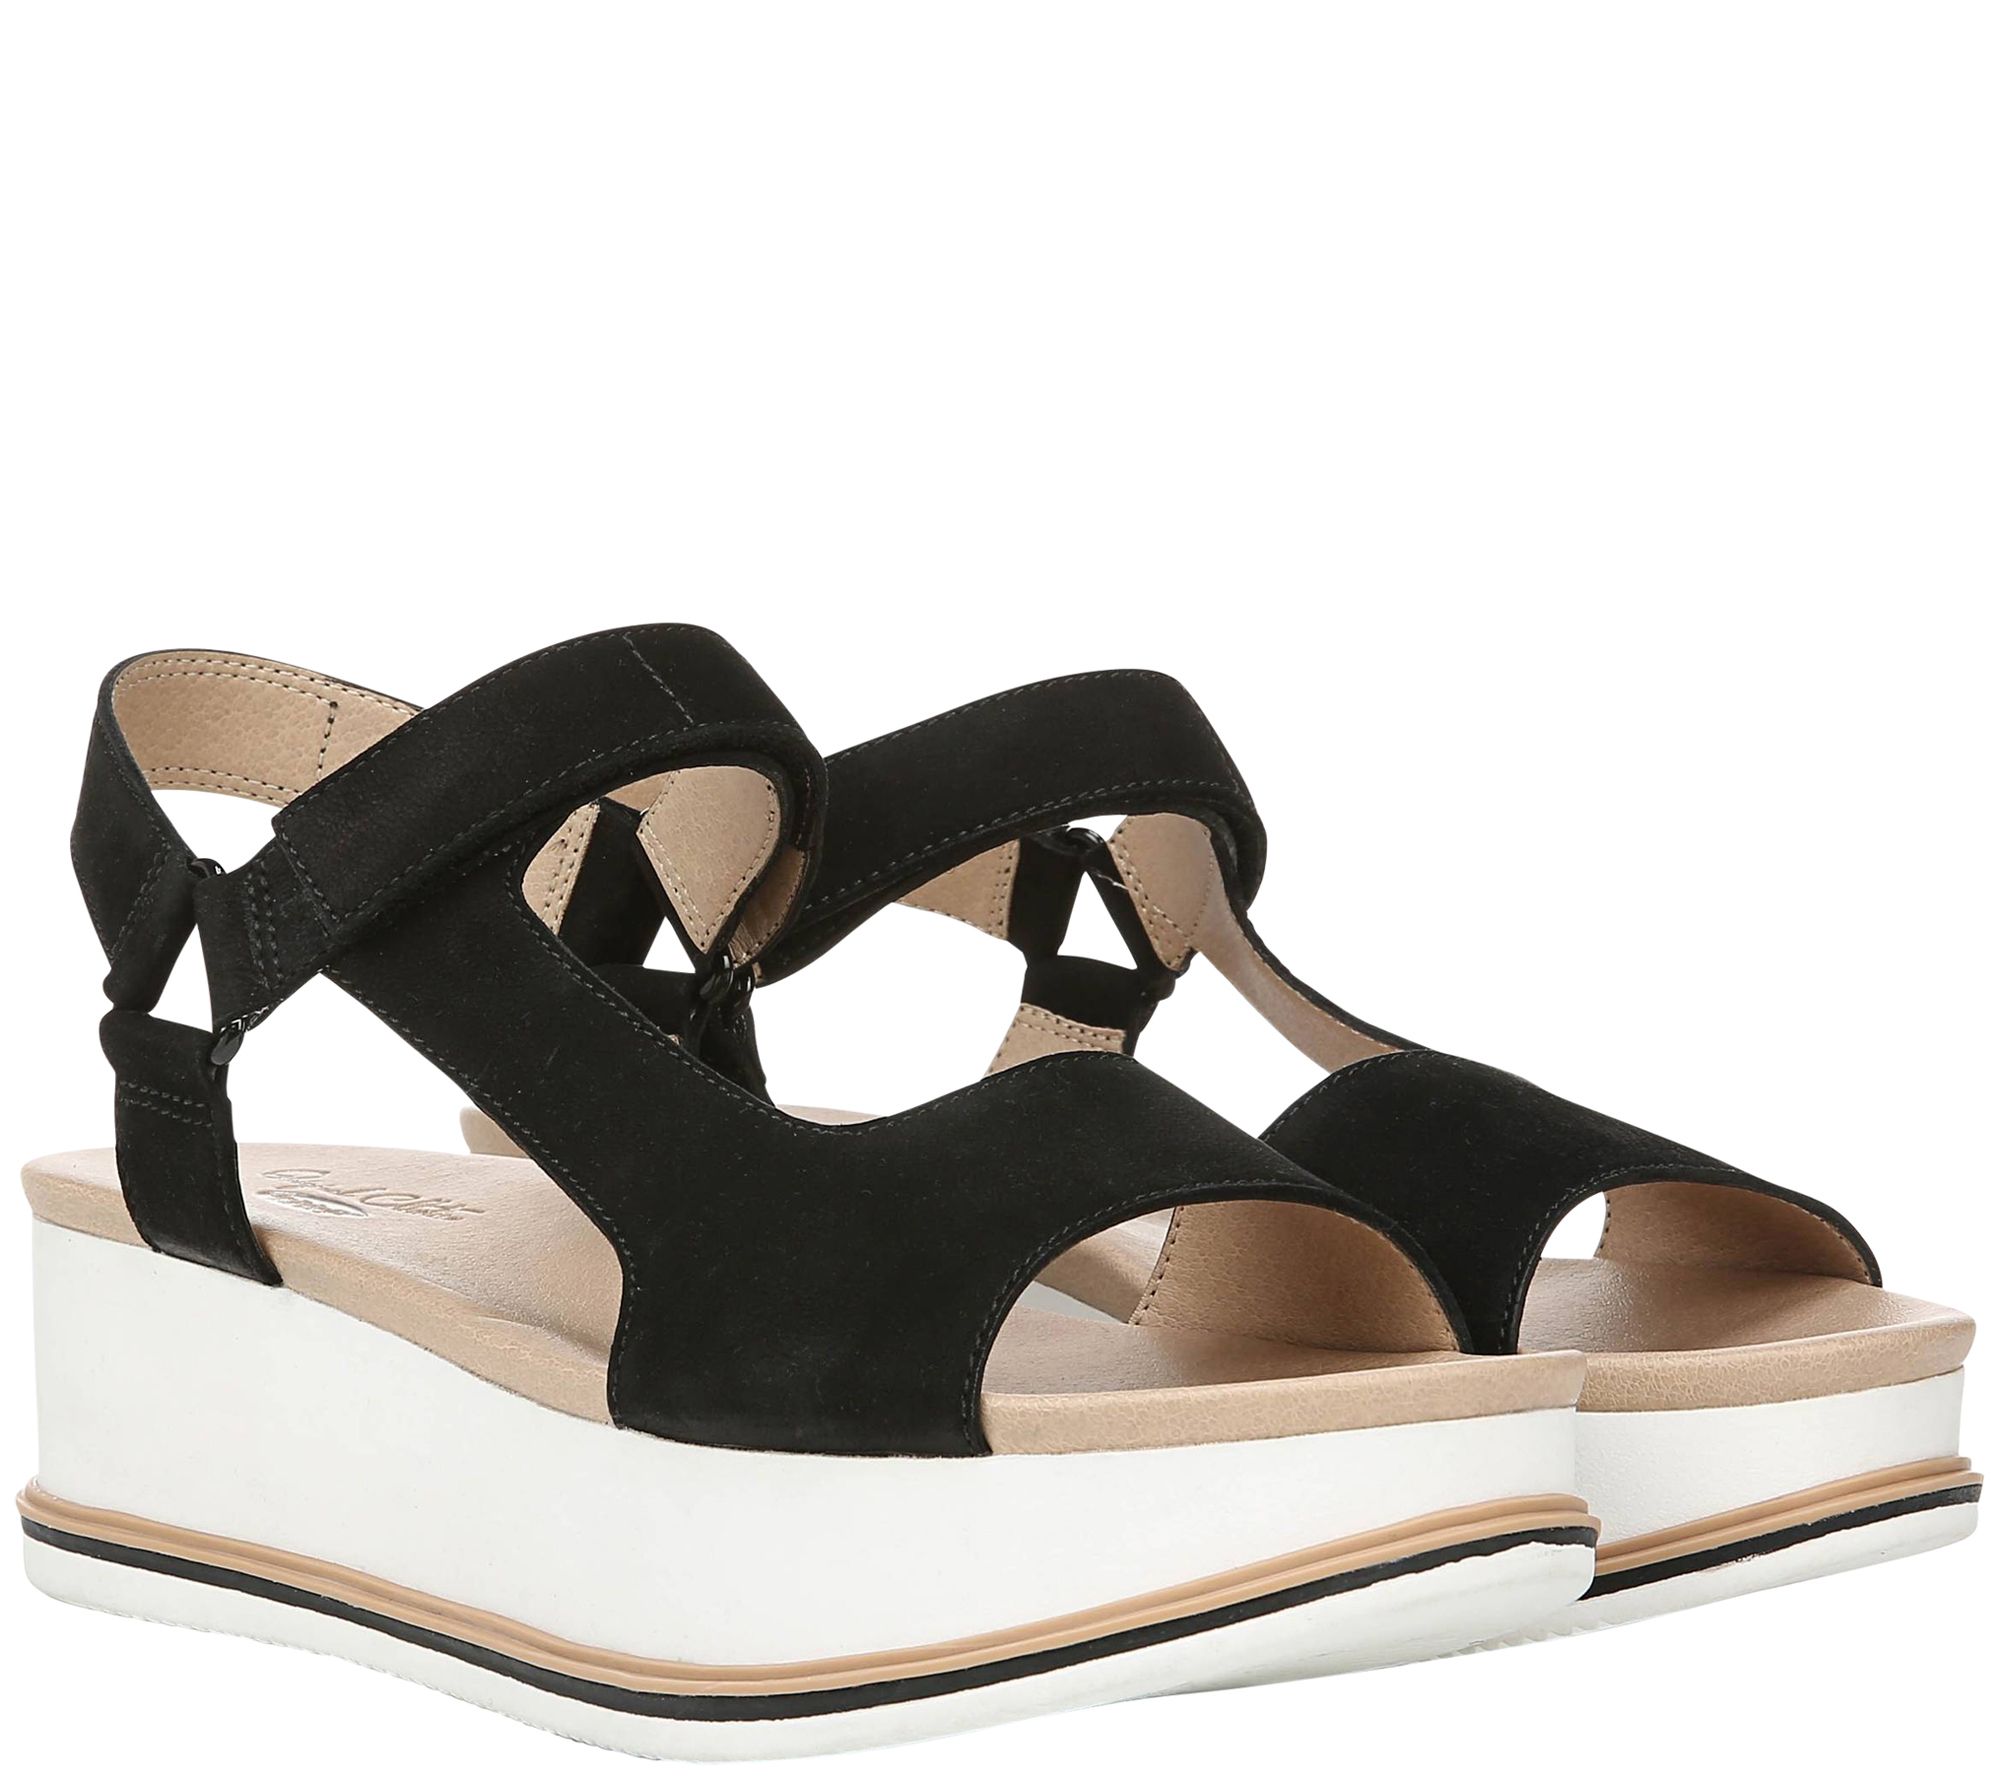 Dr. Scholl's Platform Wedge Sandals - If You Can - QVC.com